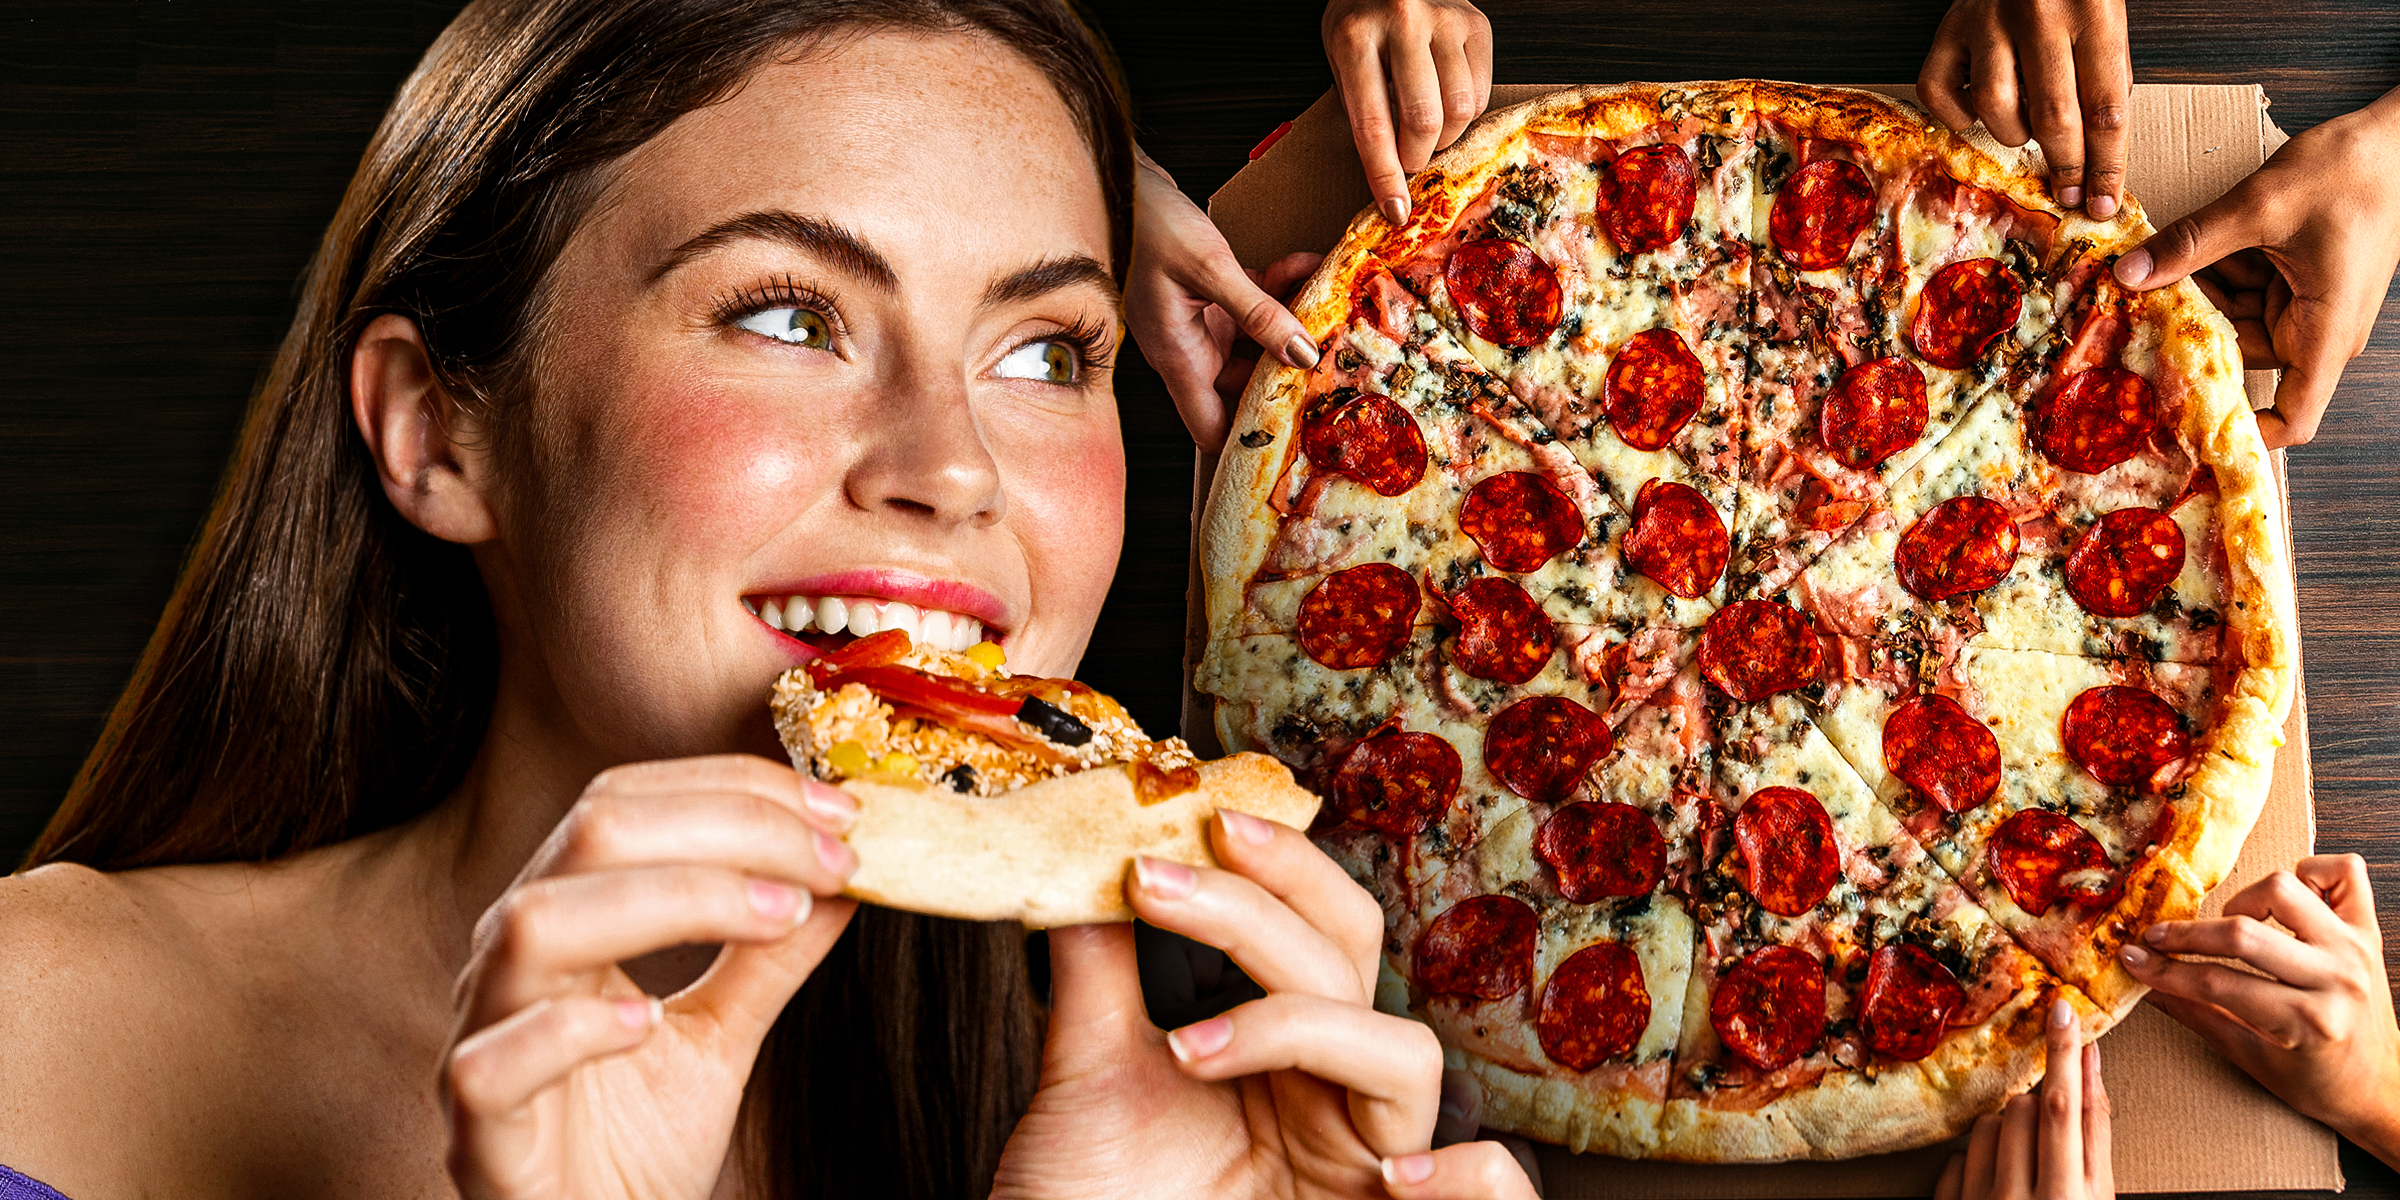 A woman enjoying a slice of pizza | Friends grabbing slices of pizza | Source: Shutterstock